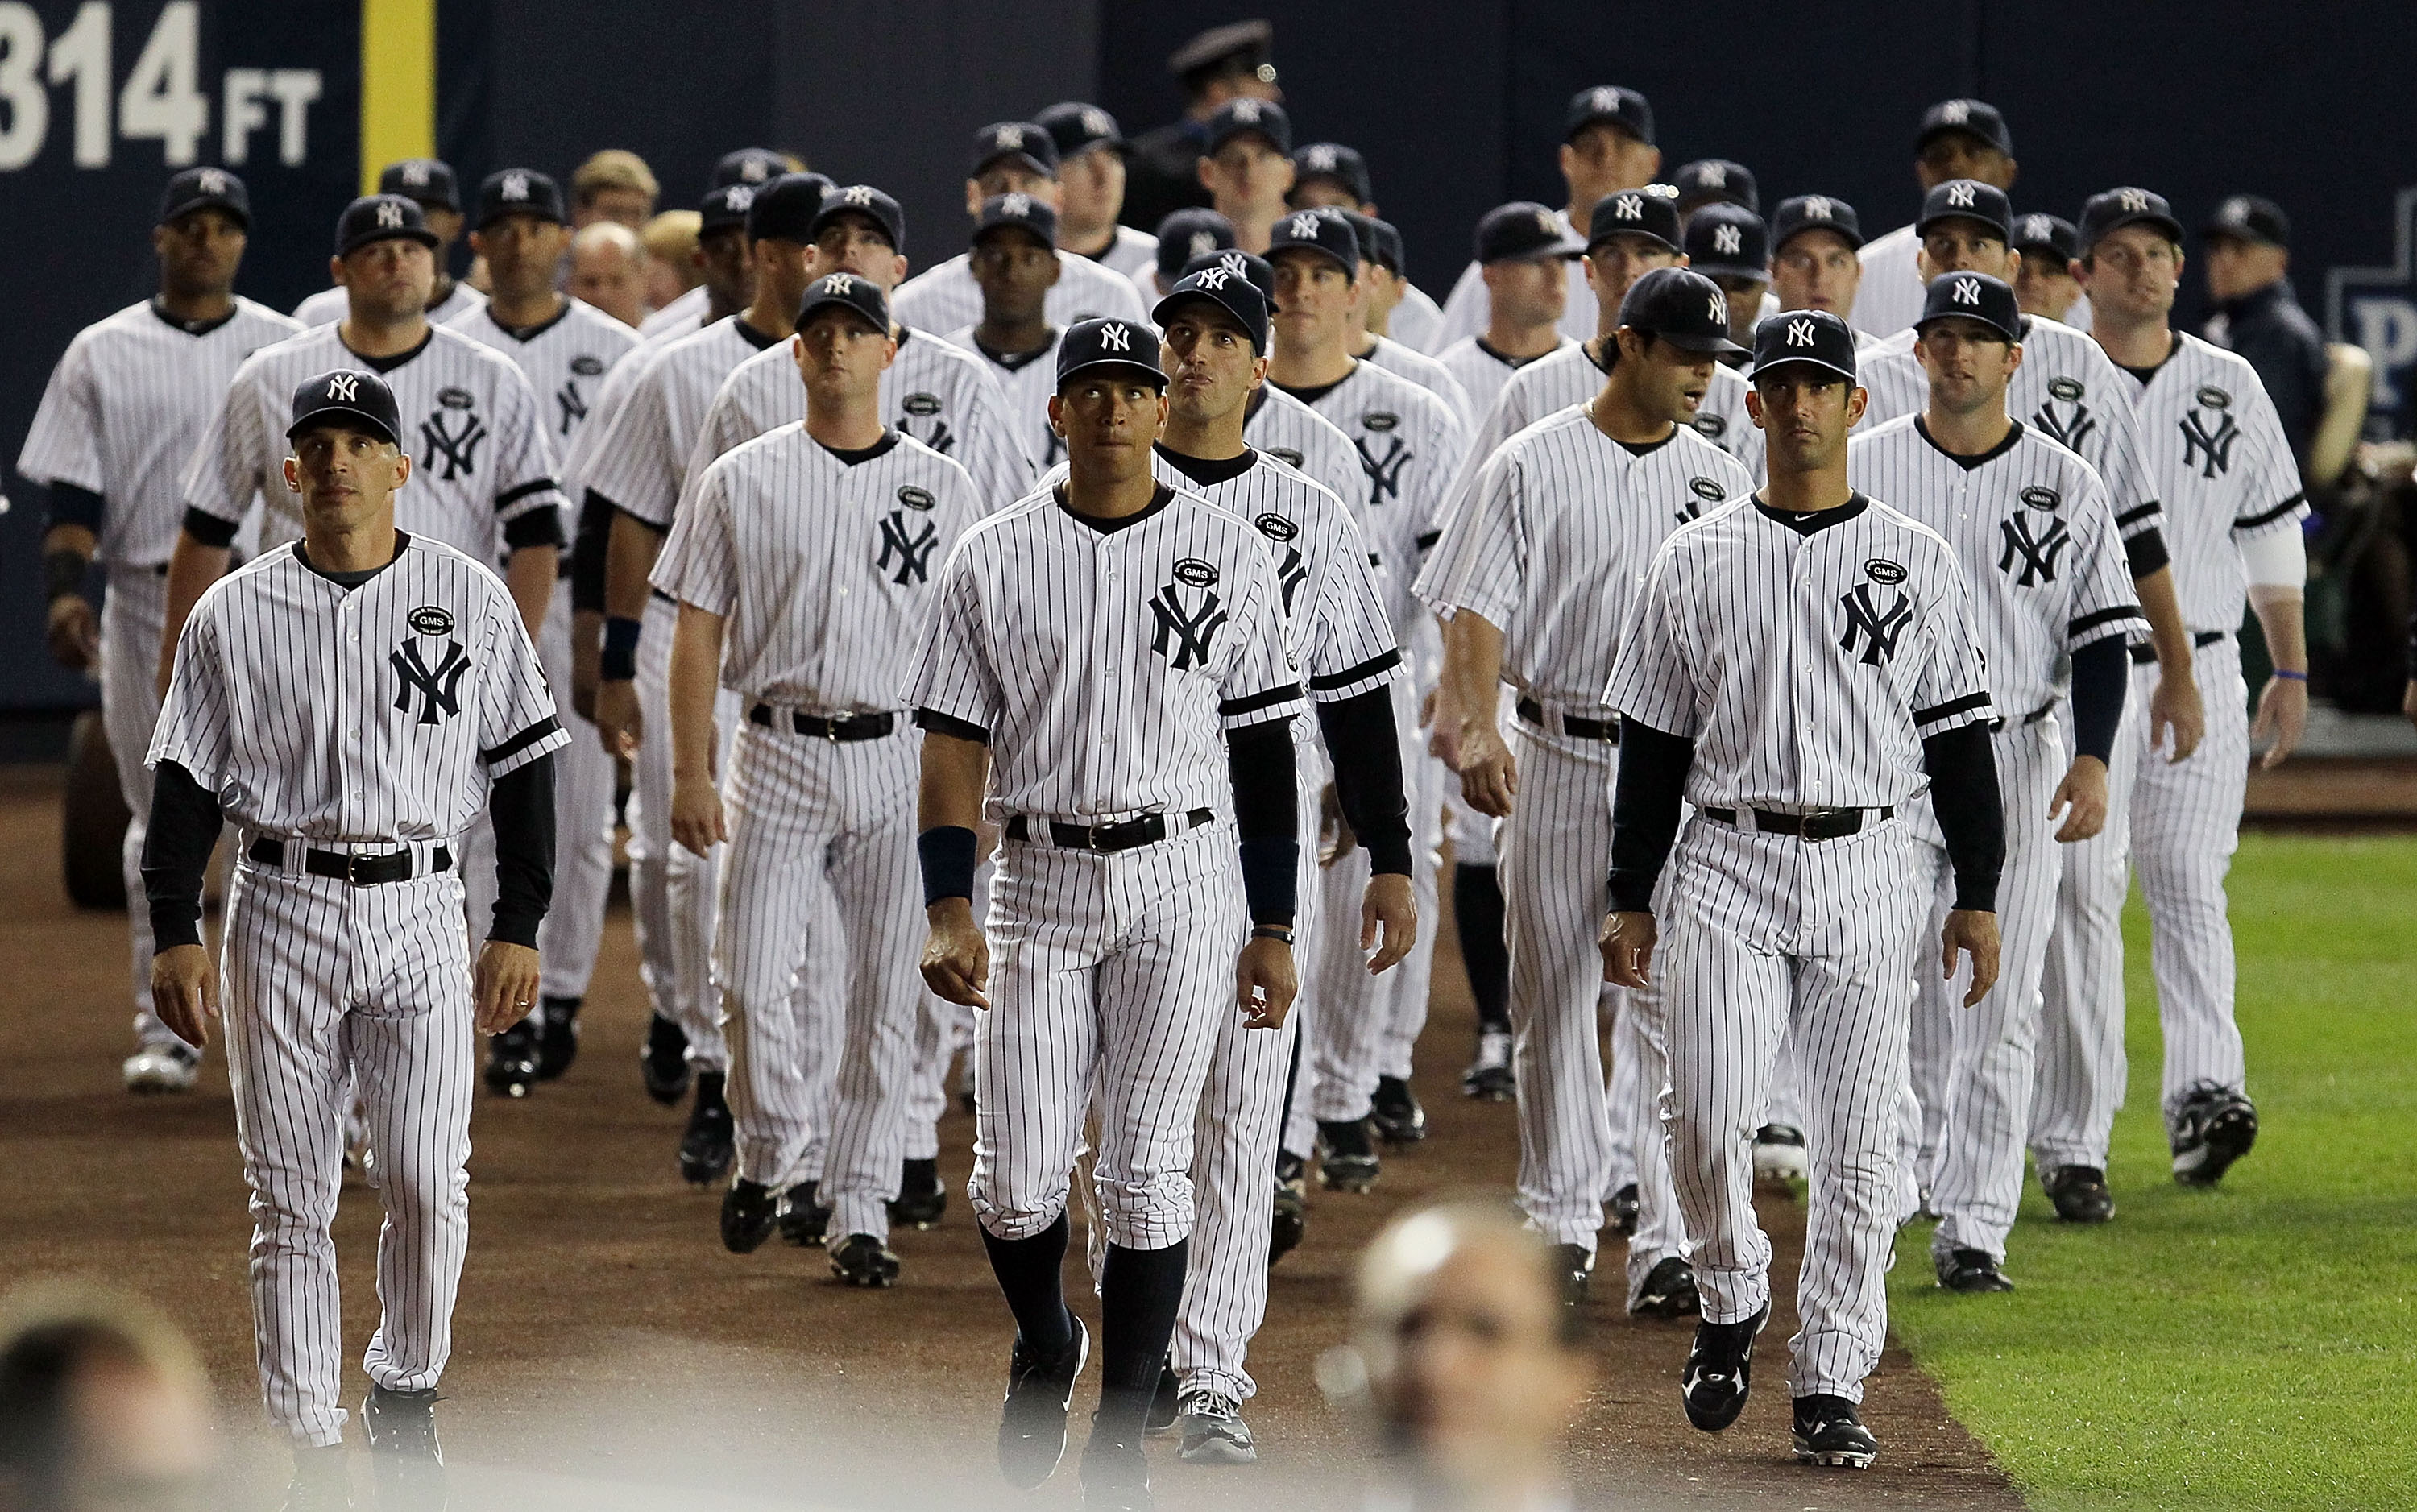 10 Reasons Why The Yankees Are America's Most Hated Team